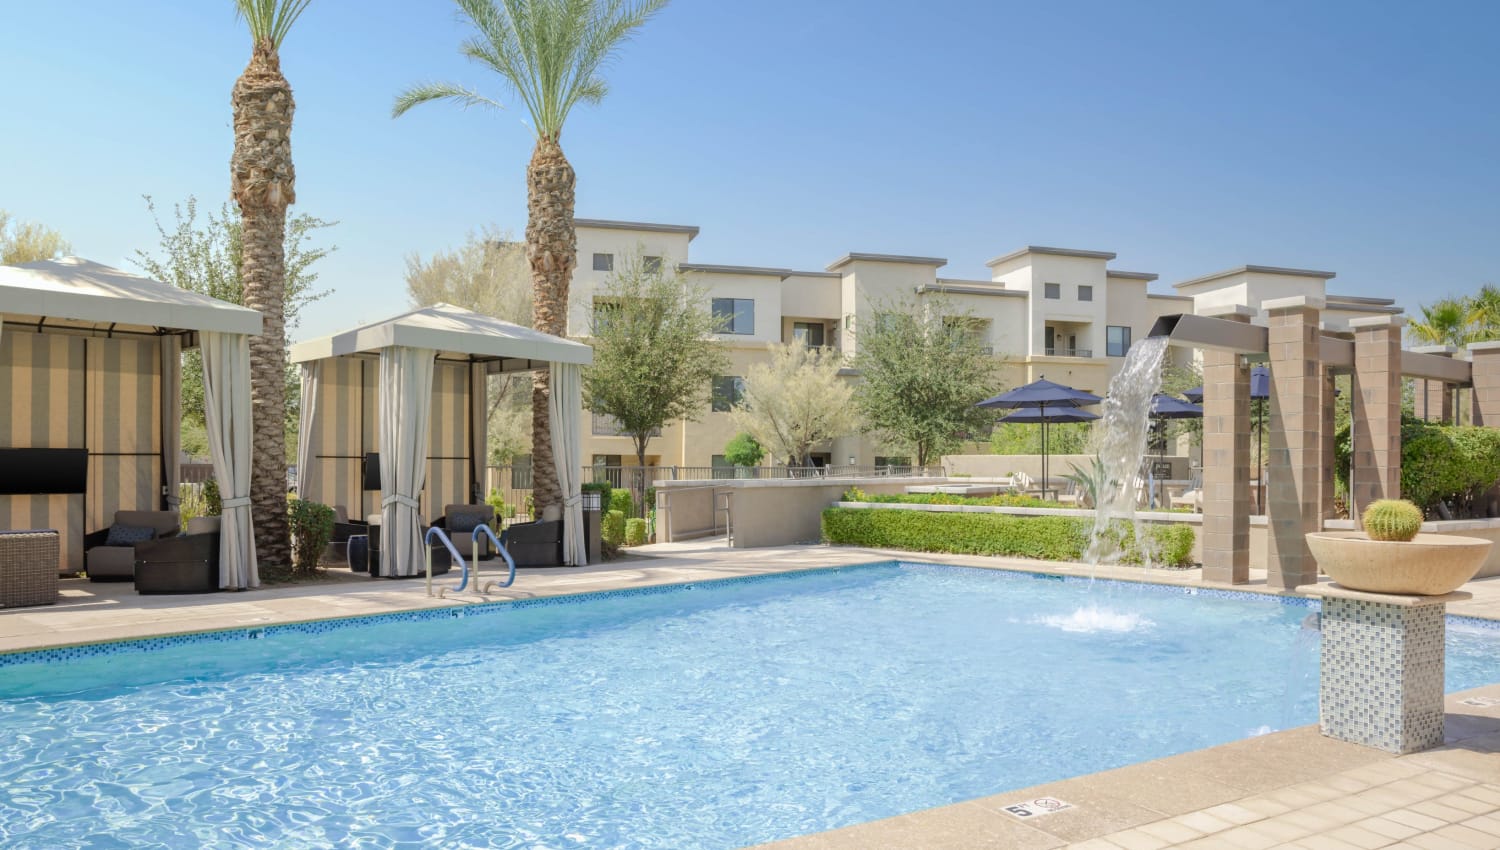 Sparkling outdoor pool with a waterfall at Cadia Crossing in Gilbert, Arizona